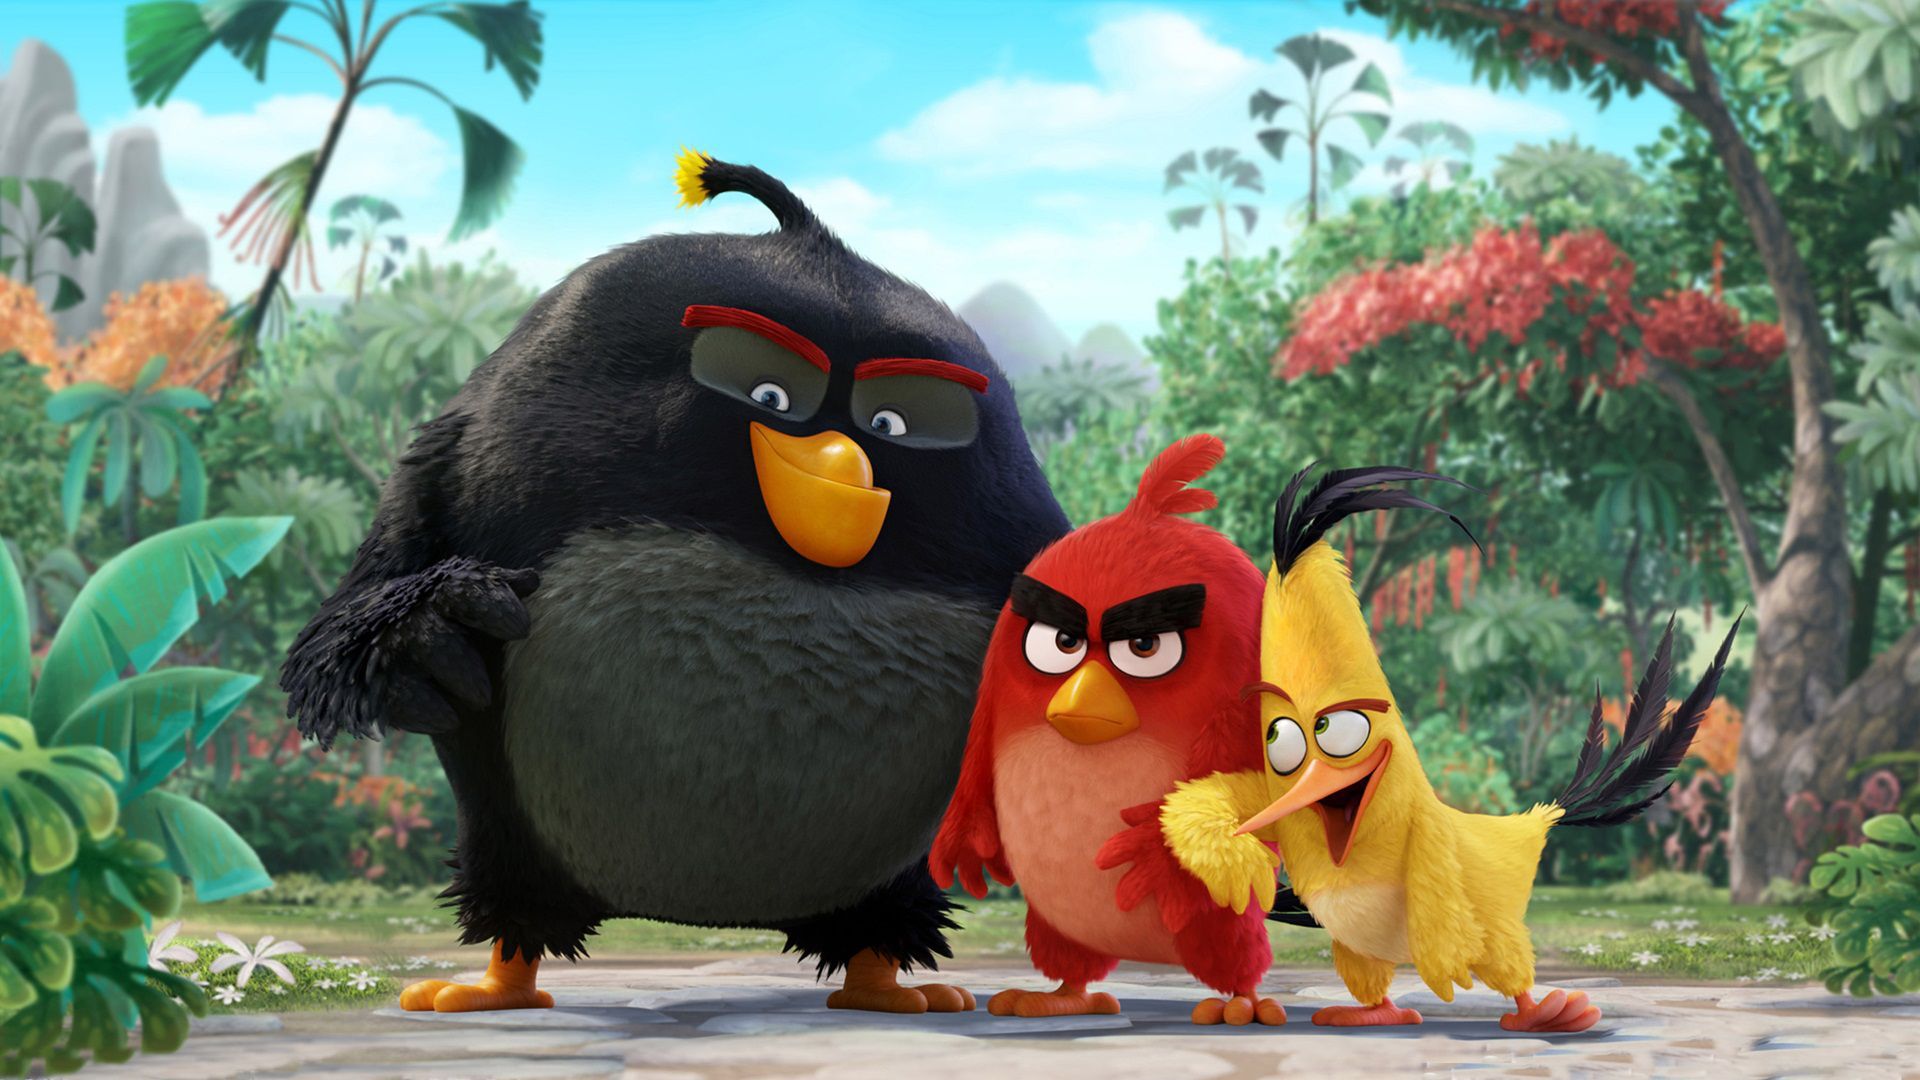 New images for ANGRY BIRDS movie Welcome to The Movies